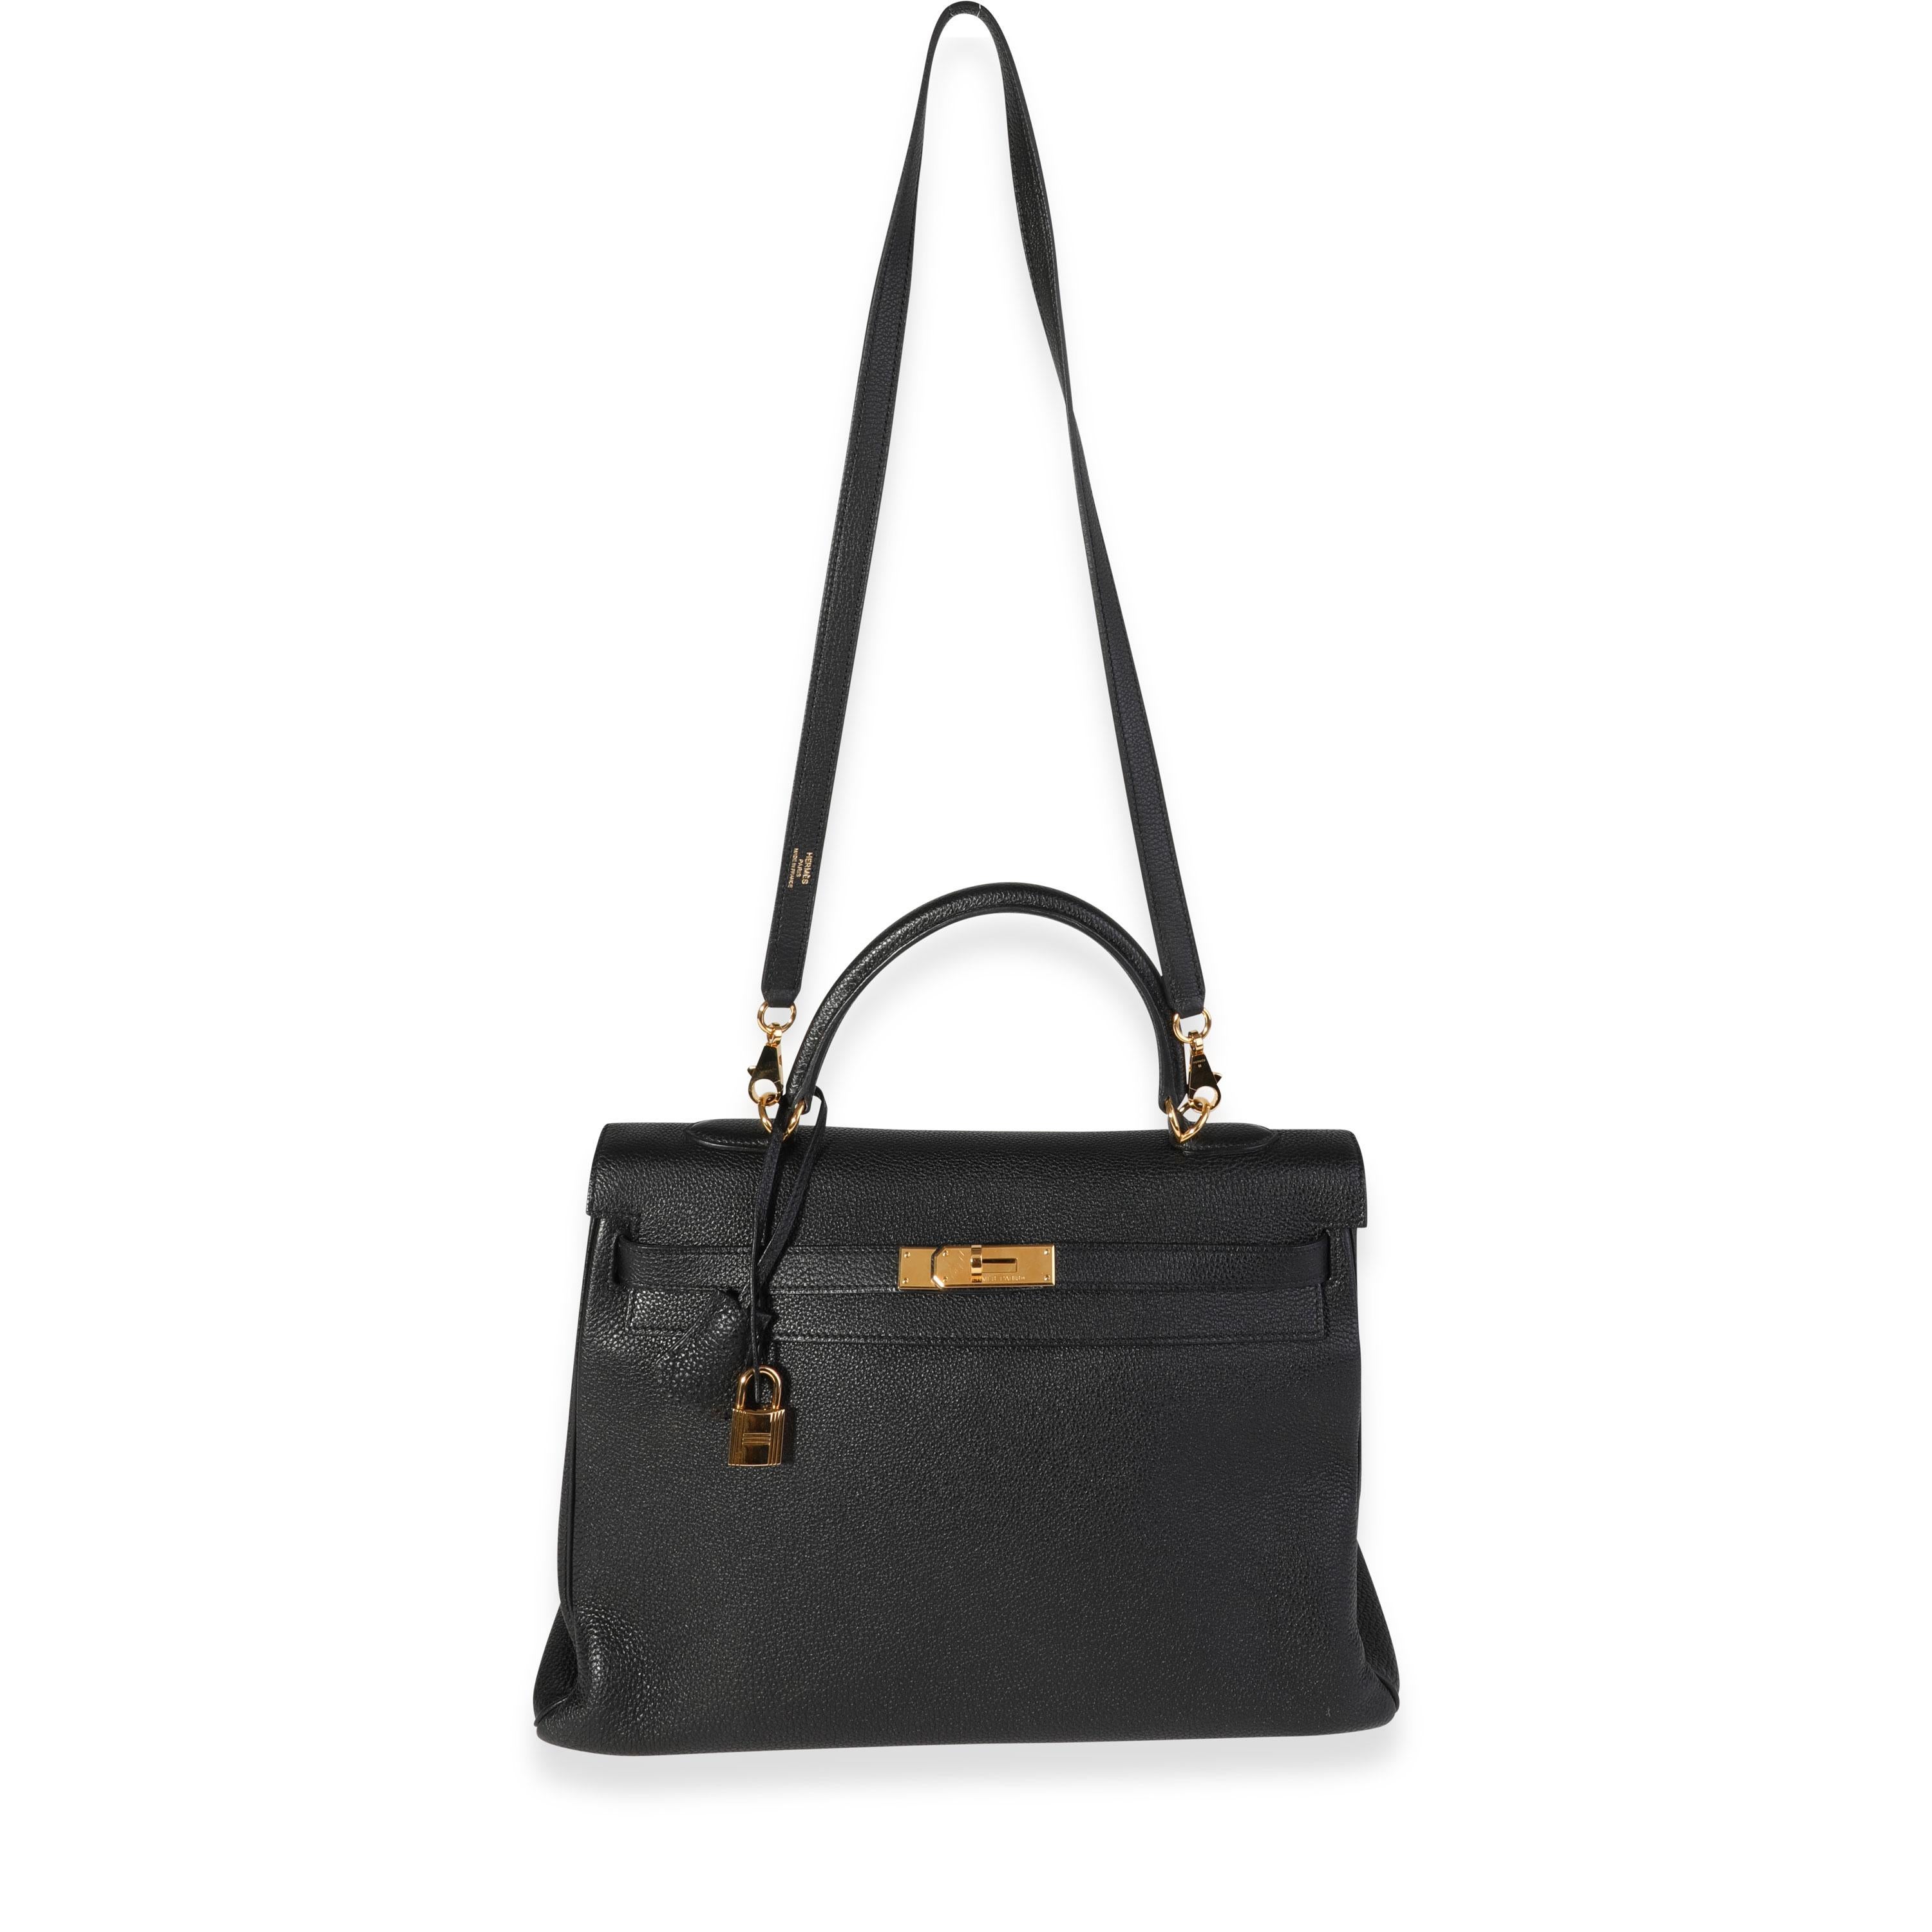 Listing Title: Hermès Black Togo Retourne Kelly 35 GHW
SKU: 120290
Condition: Pre-owned 
Handbag Condition: Very Good
Condition Comments: Very Good Condition. Plastic on some hardware. Light scuffing to corners and exterior. Scratching to hardware.